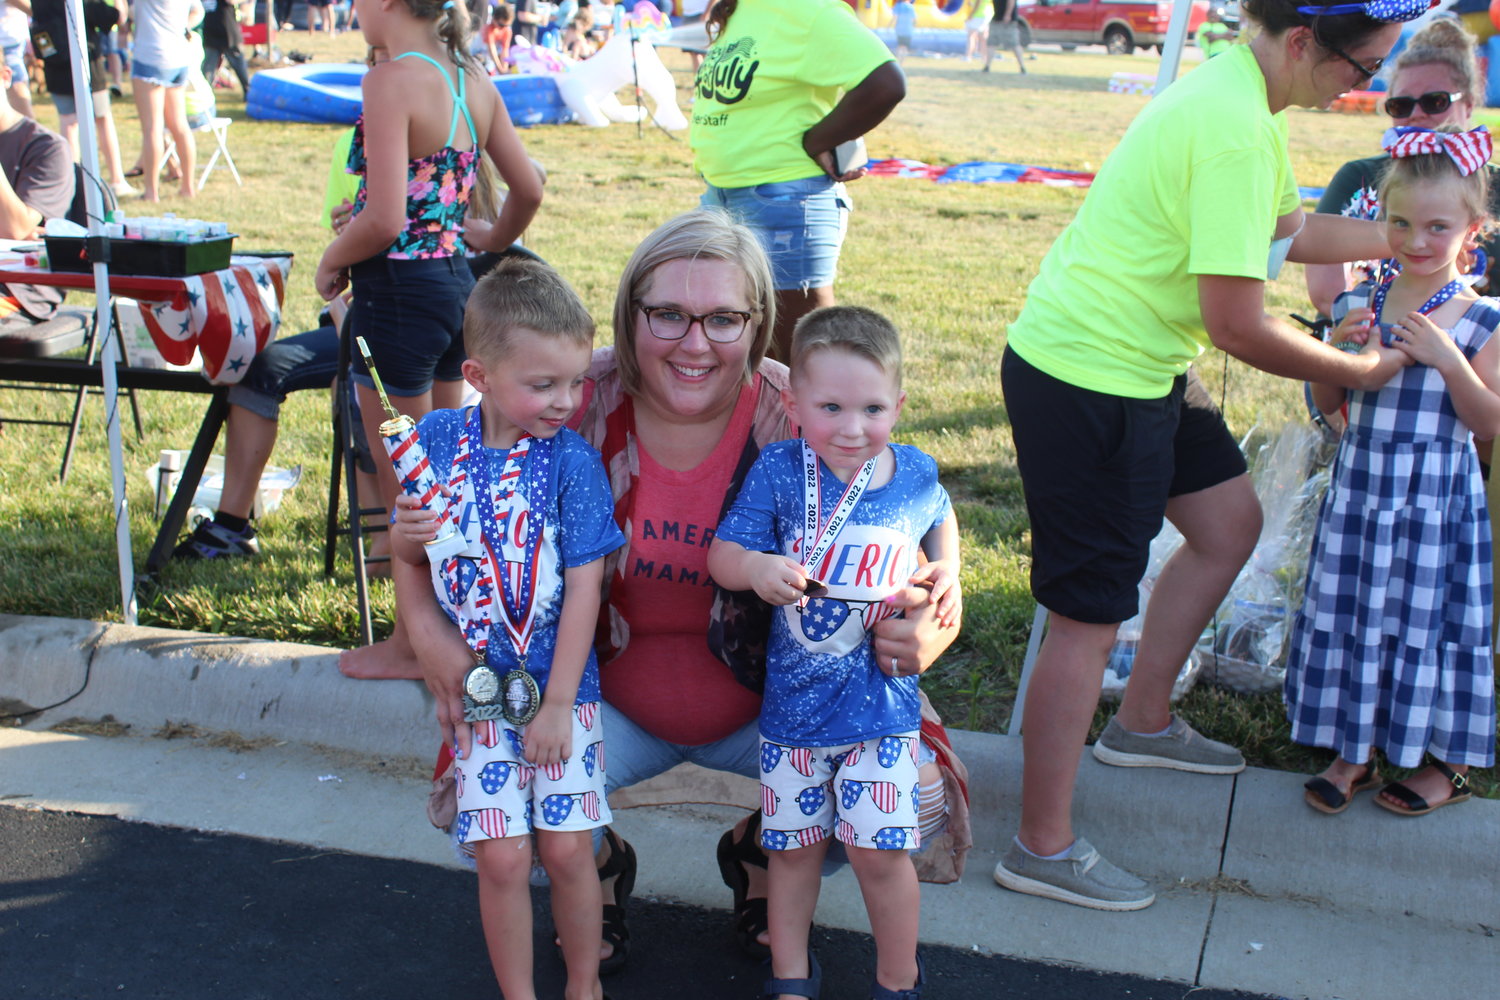 USA born and raised. A proud mom and her two Mr. Patriotic Winners form the Copper Rock Village Celebration.